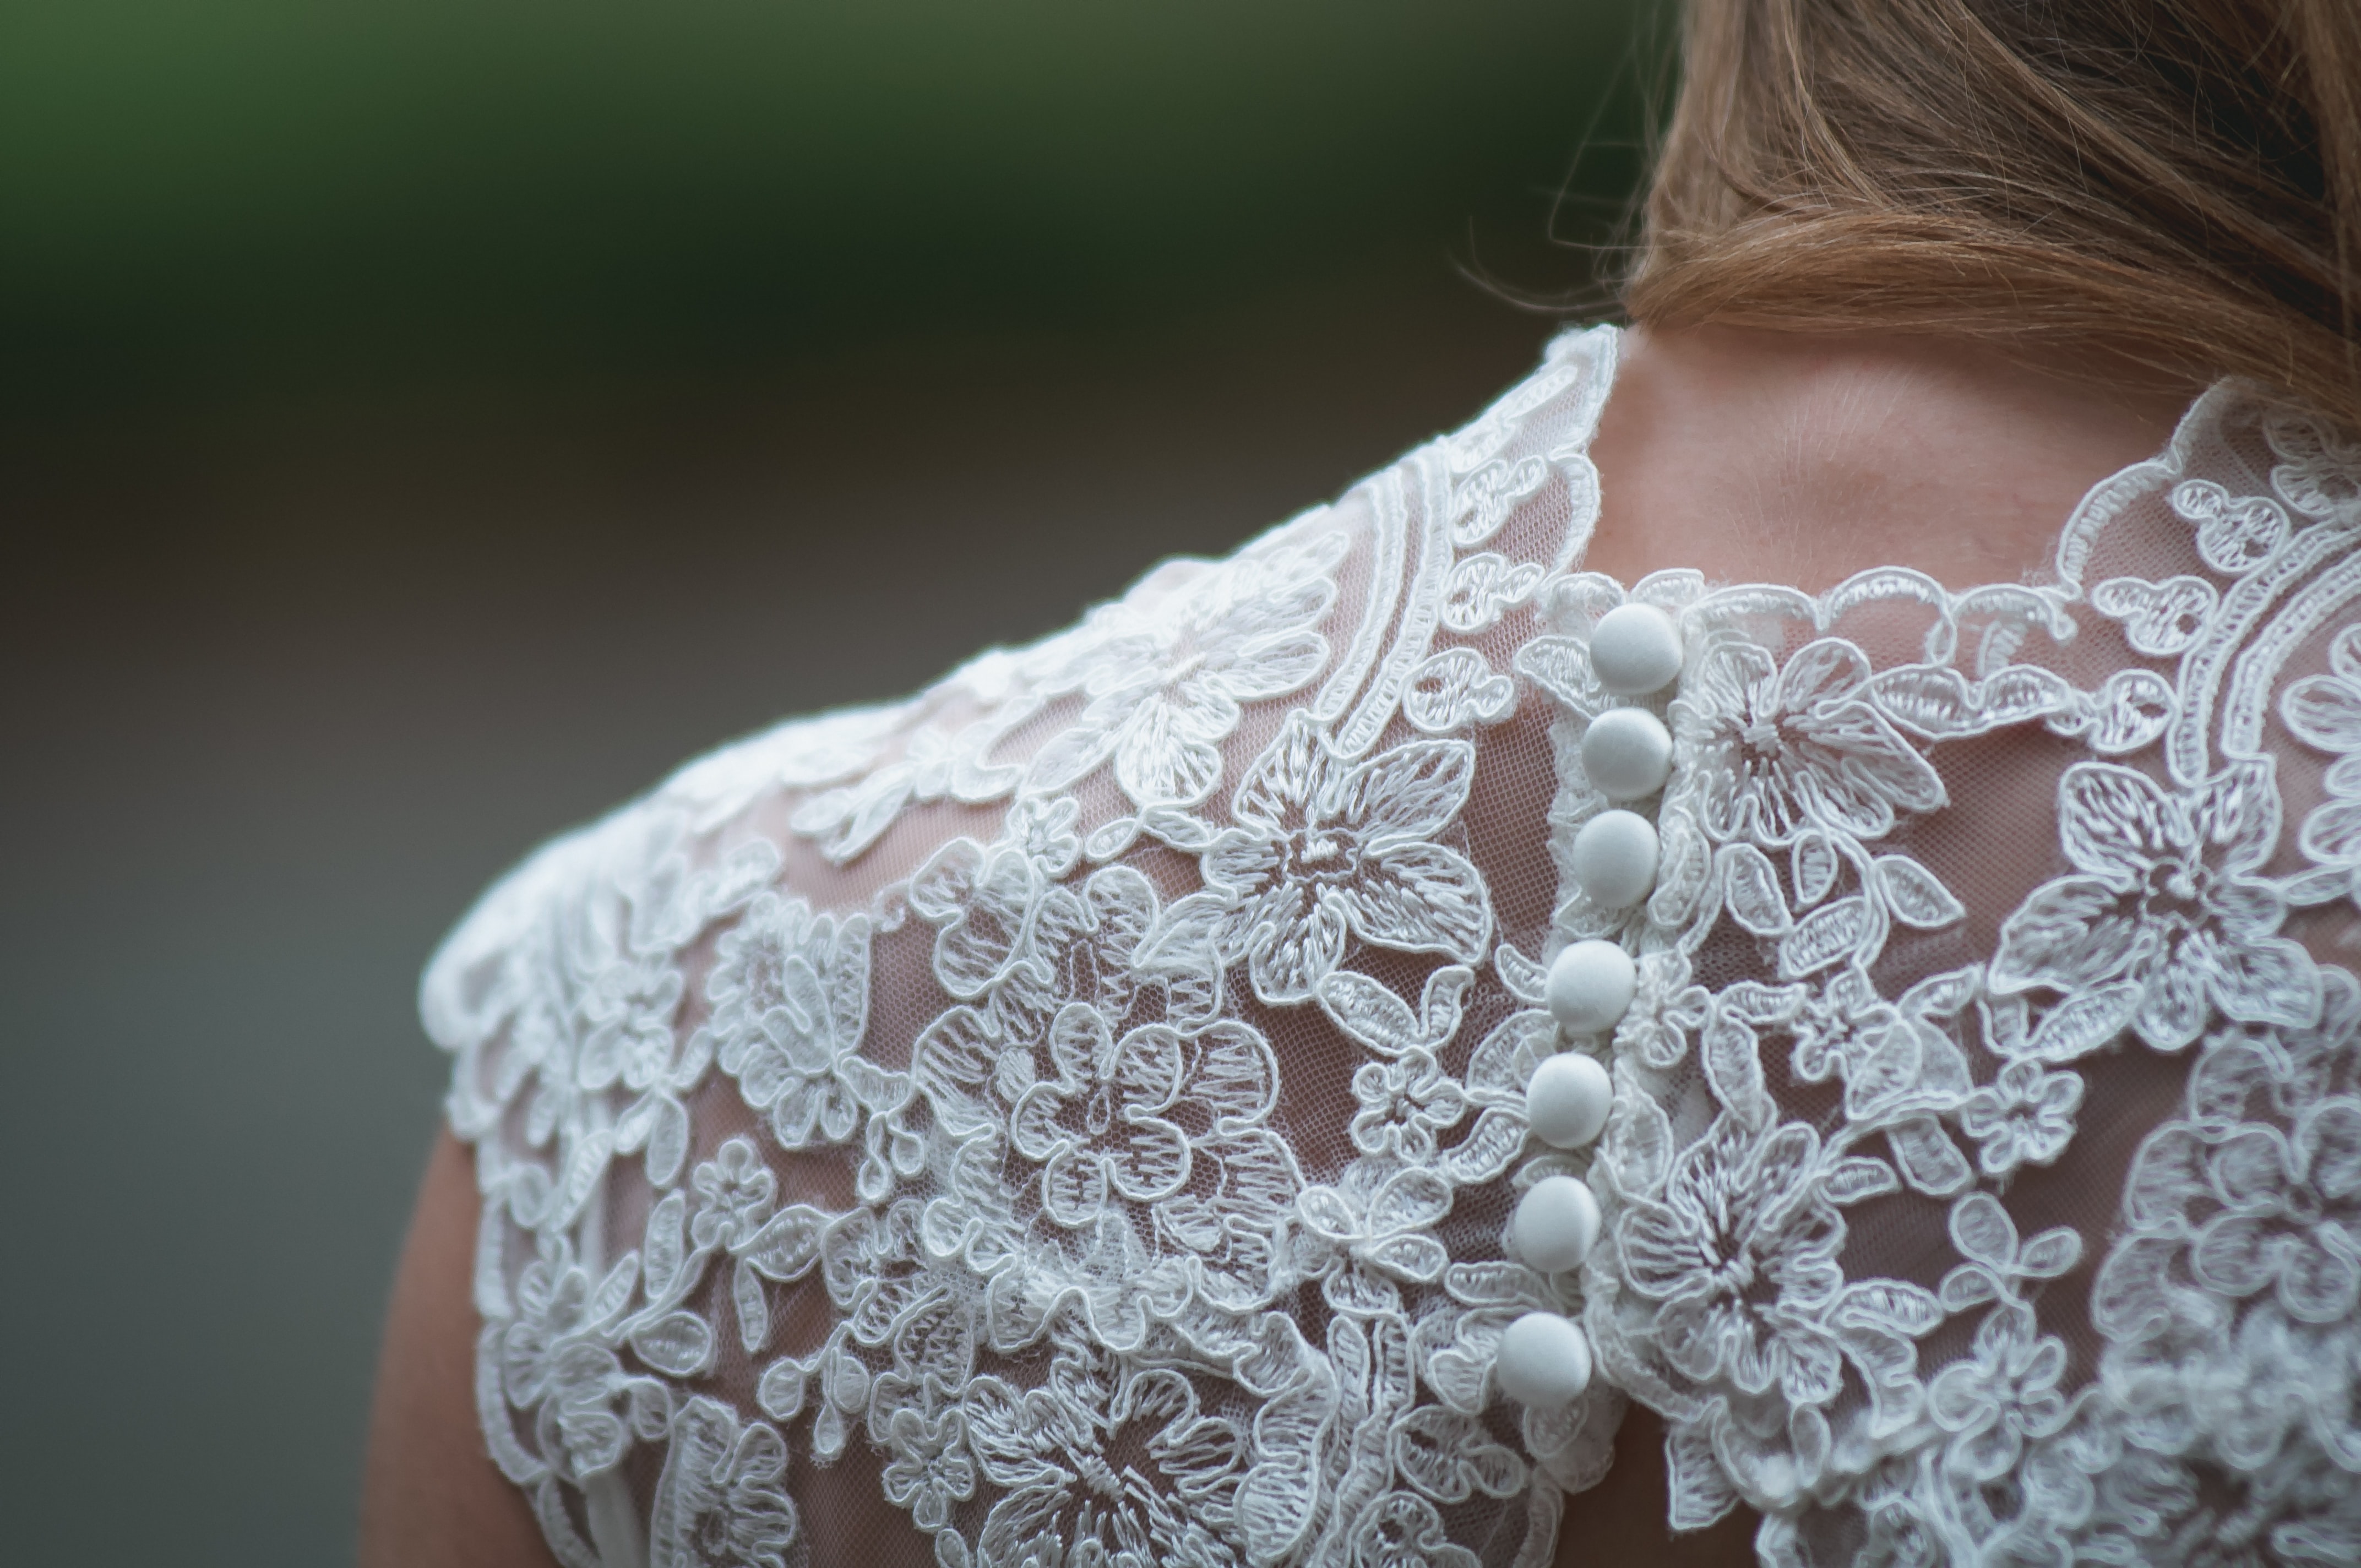 Image shows the details on the back of a Brides dress showing lace and buttons